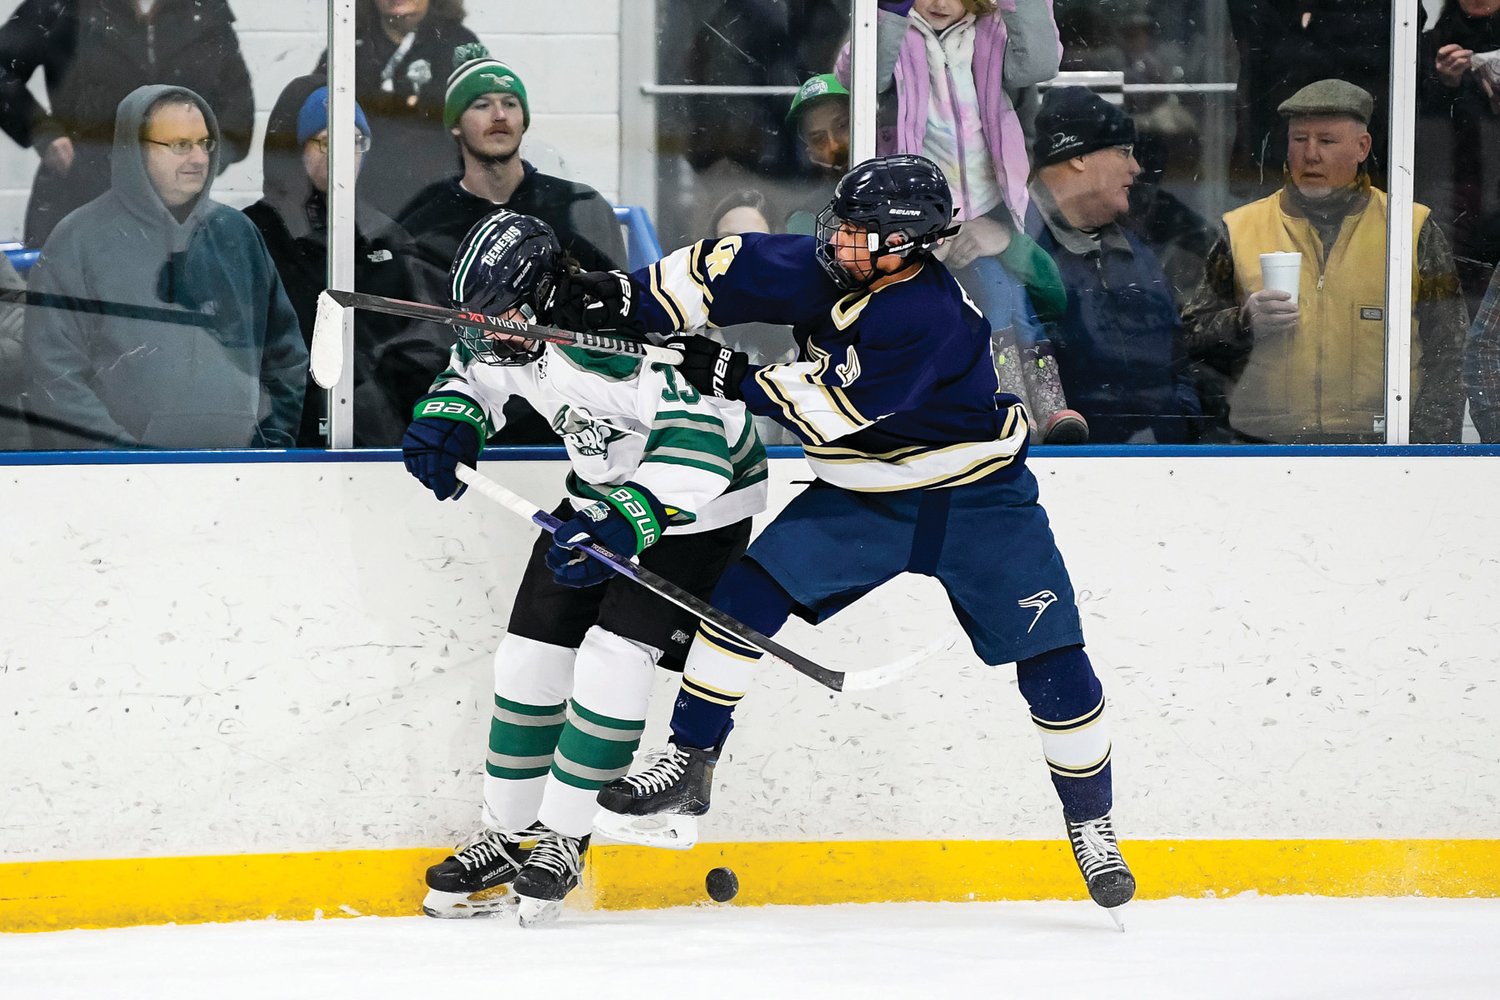 CR South’s Daniel Filippov checks Pennridge’s Joshua Kelly up high while battling for the puck in the second period.